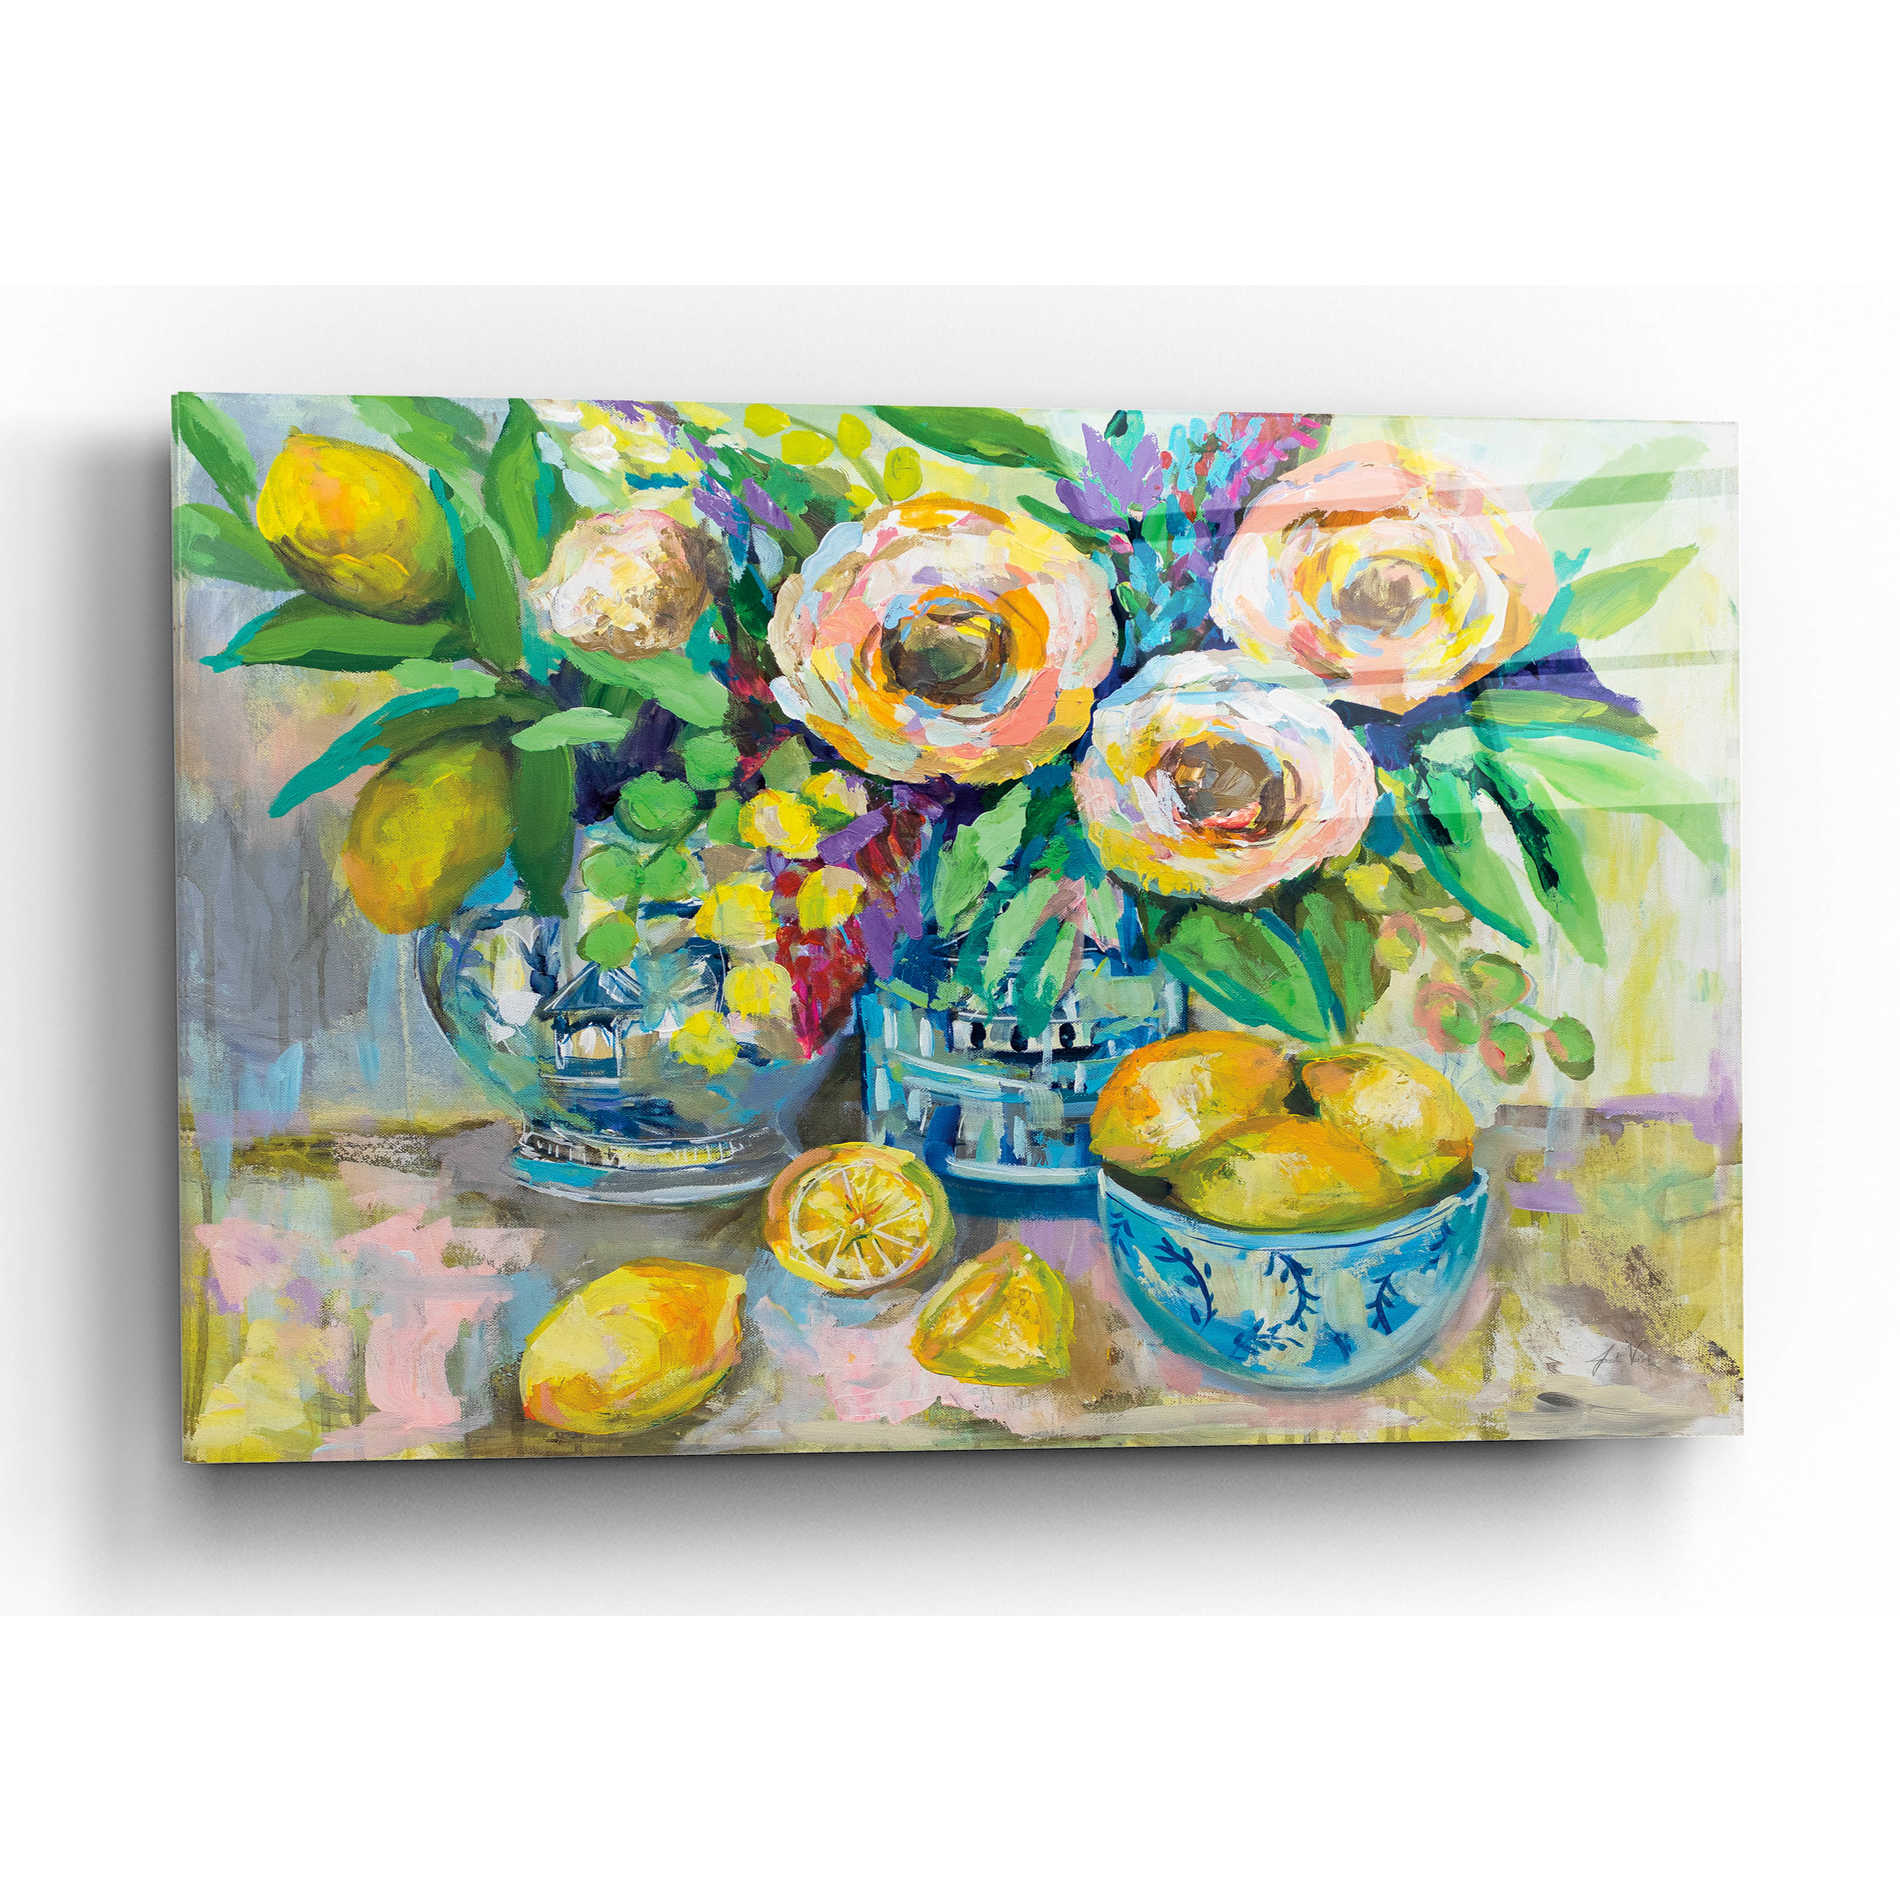 Epic Art 'Afternoon Lemonade' by Jeanette Vertentes, Acrylic Glass Wall Art